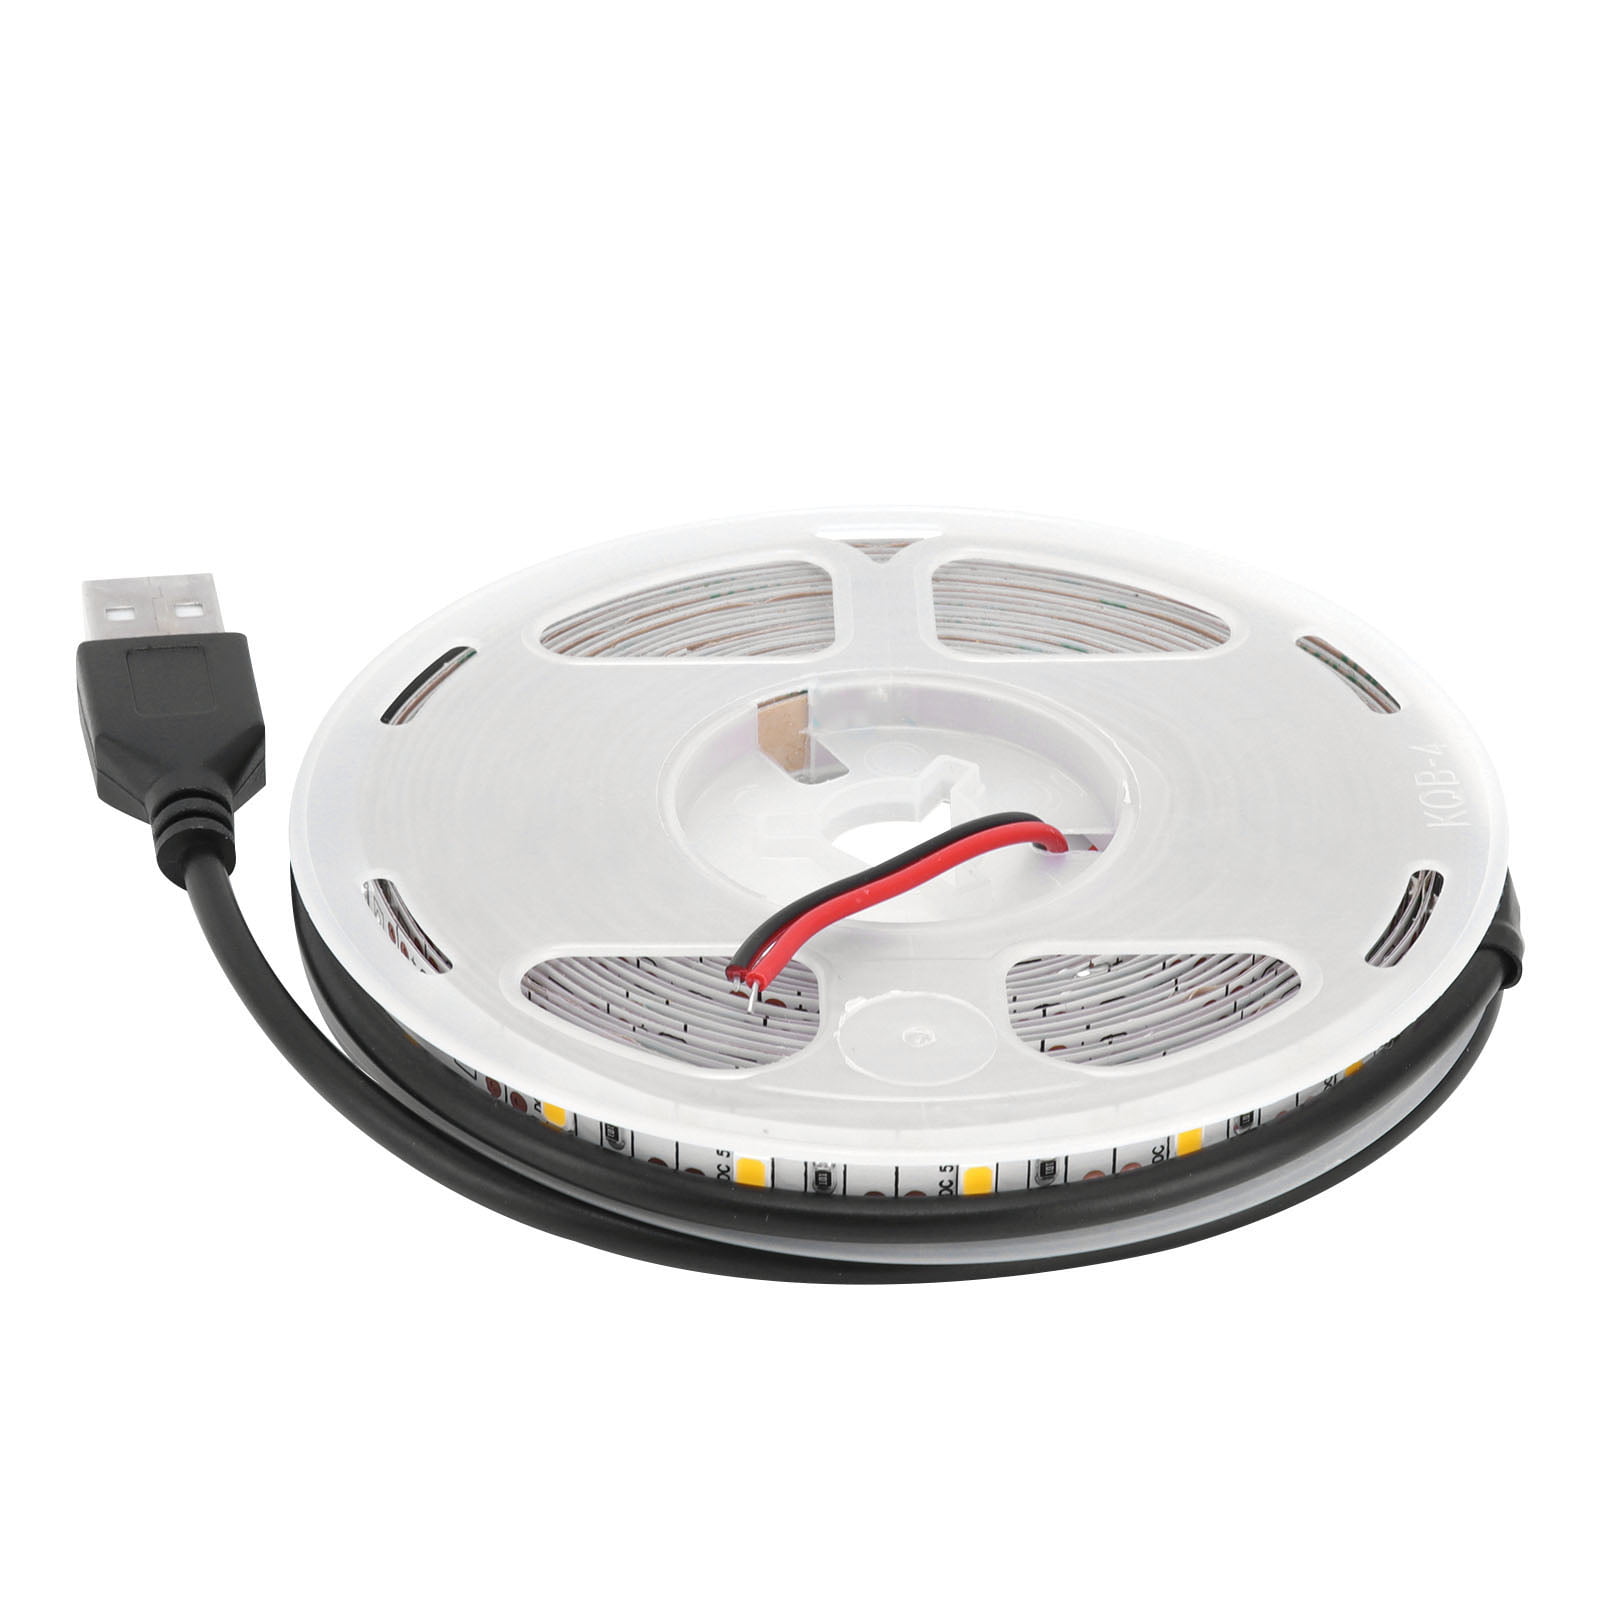 Details about   Flexible 0.5-5M LED Strip Lights USB Waterproof Cool White TV Kitchen Celiing 